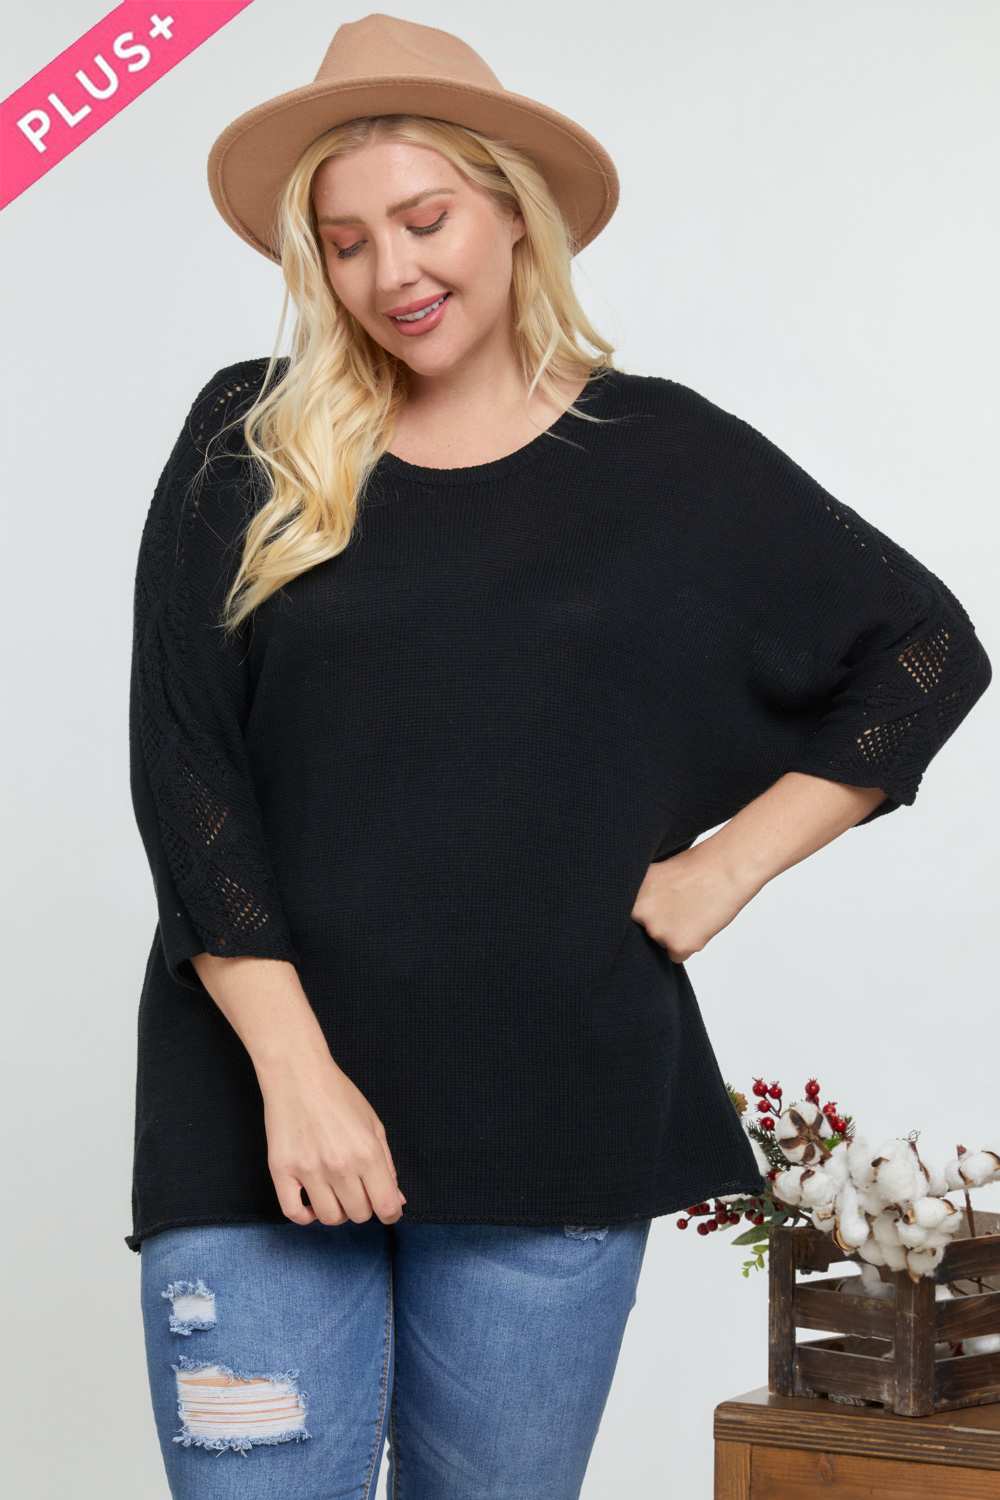 Women's Plus Solid Round Neck 3/4 Sleeve Sweater Top